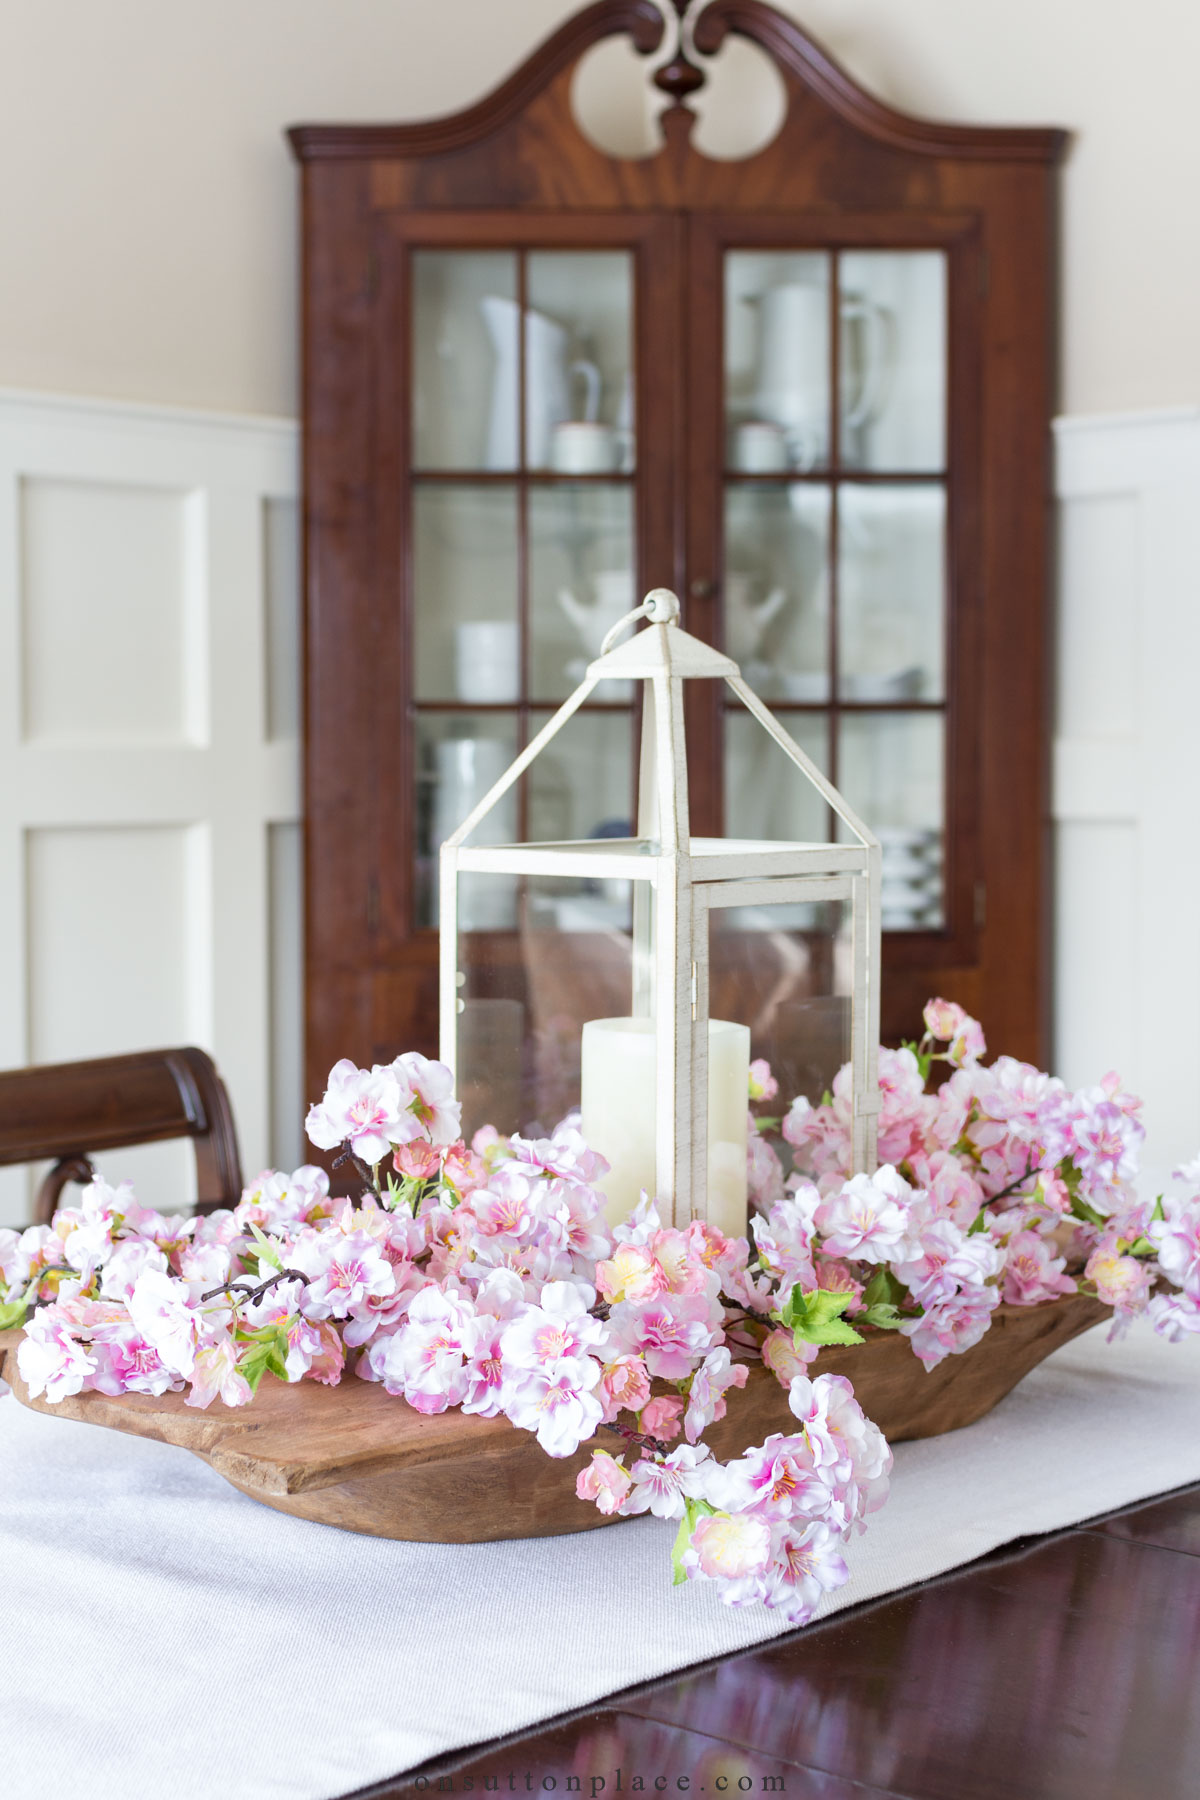 https://www.onsuttonplace.com/wp-content/uploads/2023/07/dining-room-table-centerpiece-with-dough-bowl-cherry-blossoms-.jpg